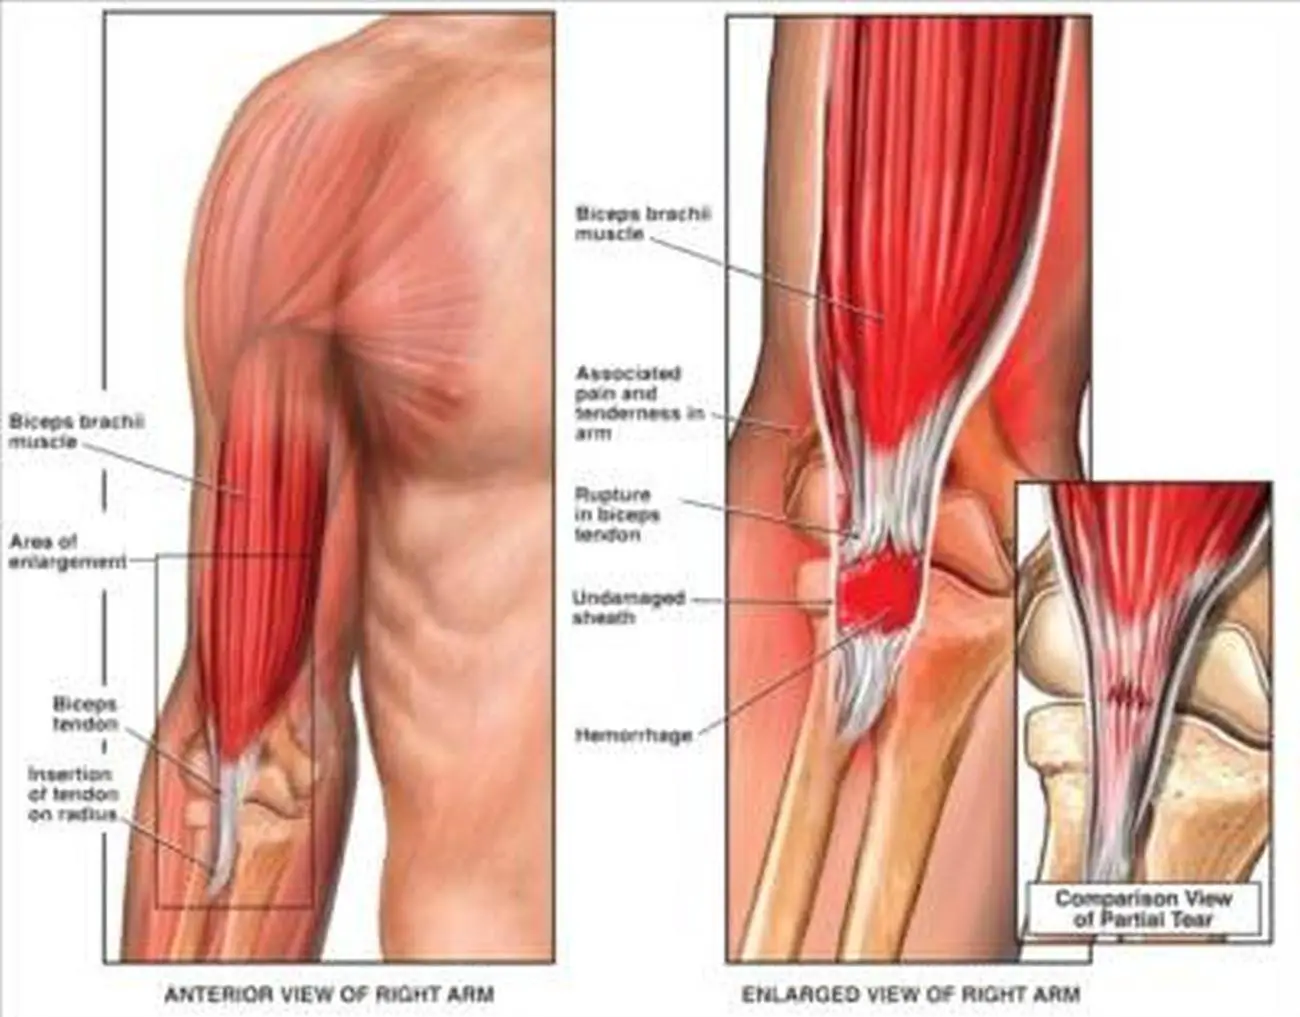 Pictures Of Biceps Brachii Tendons